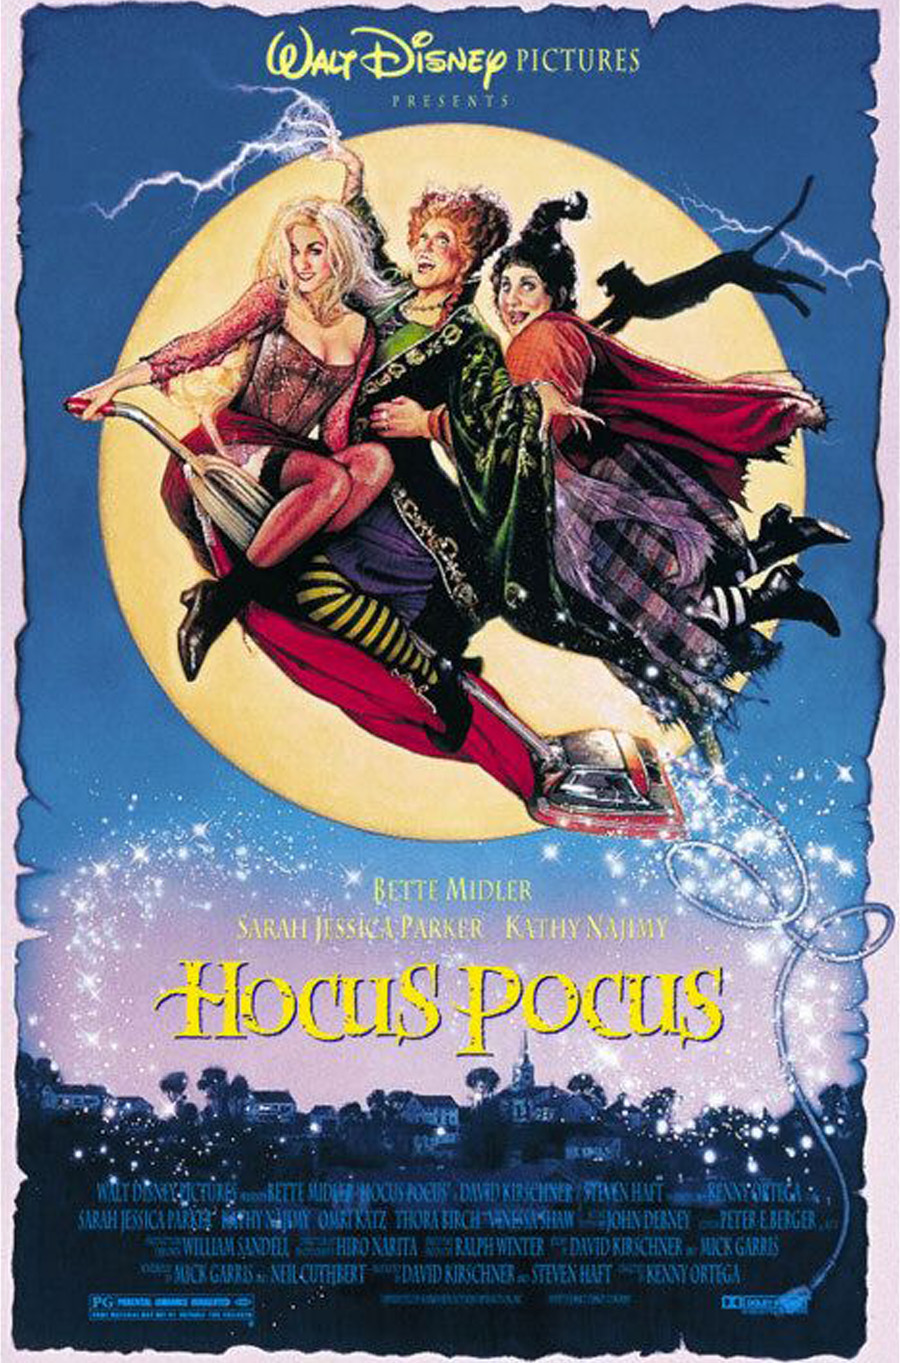 Walt Disney's hocus pocus movie poster.Three witches on a broom in front of the moon.